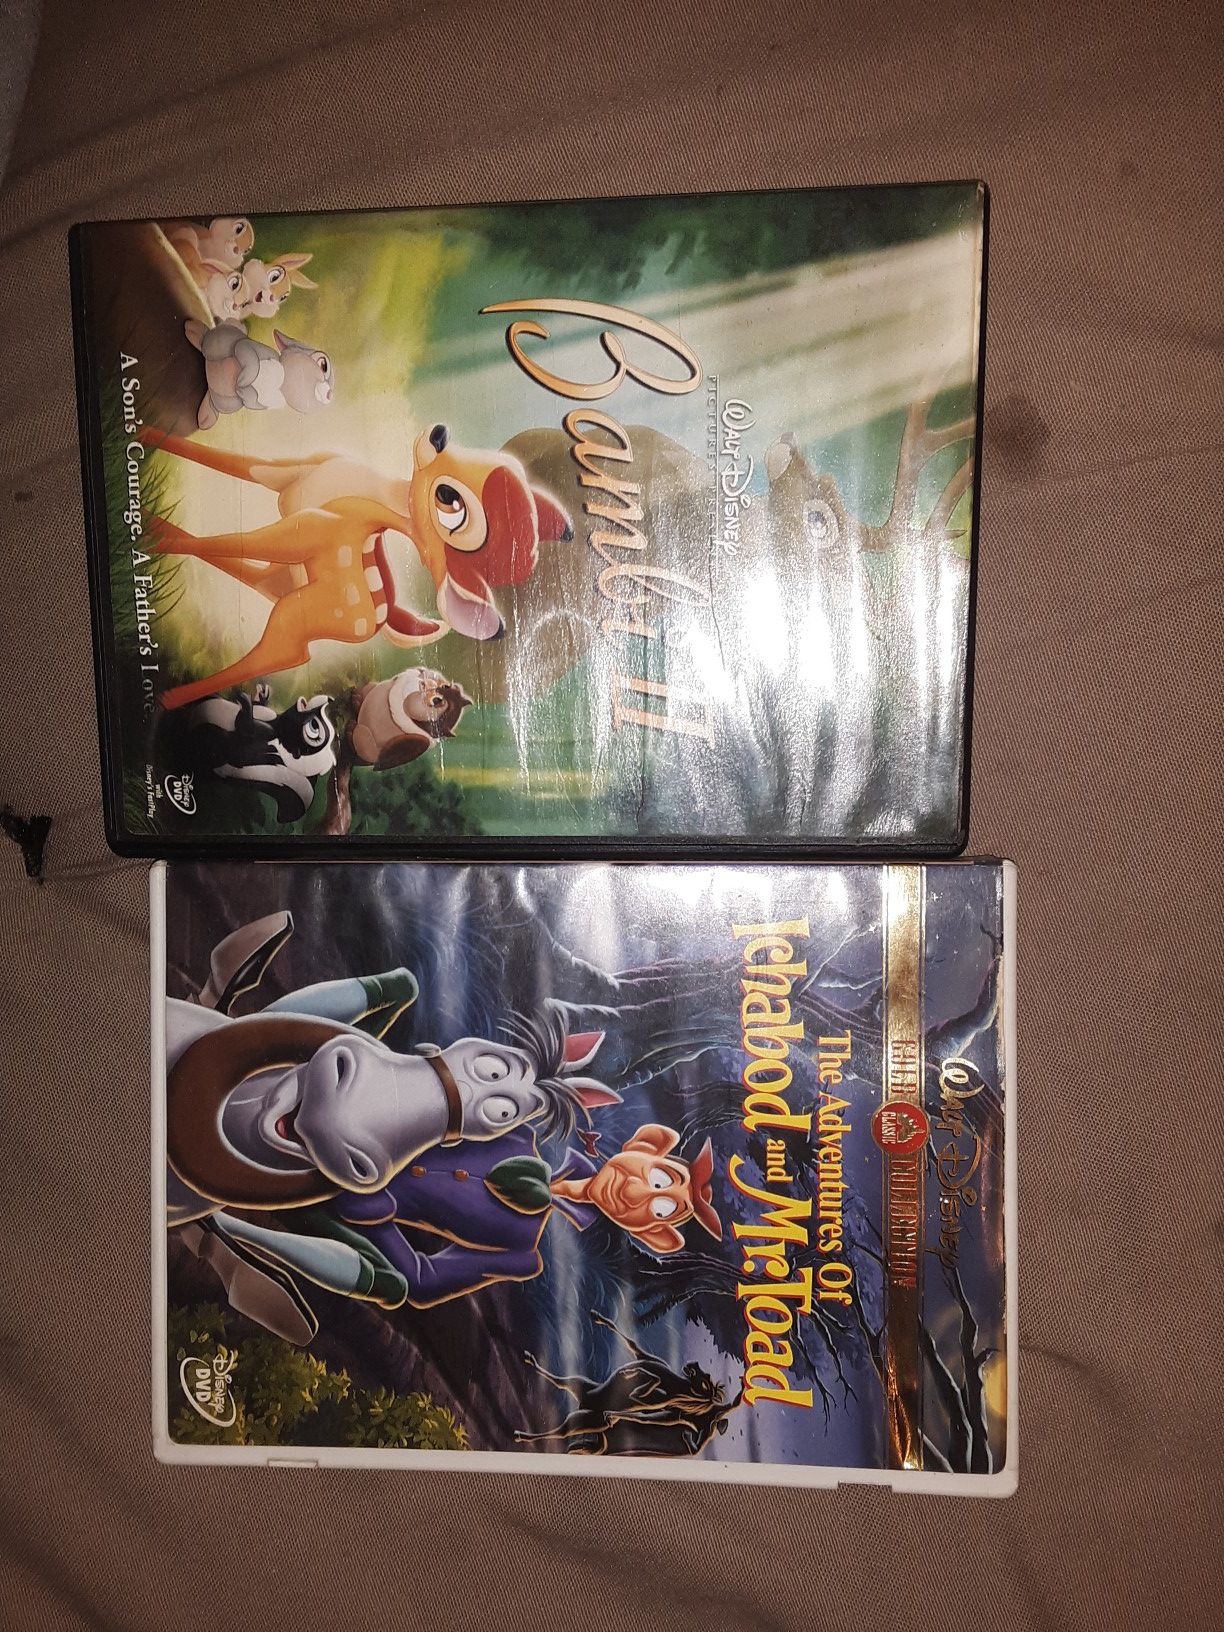 Bambi 2 and the adventures of Ichabod and mr. Toad